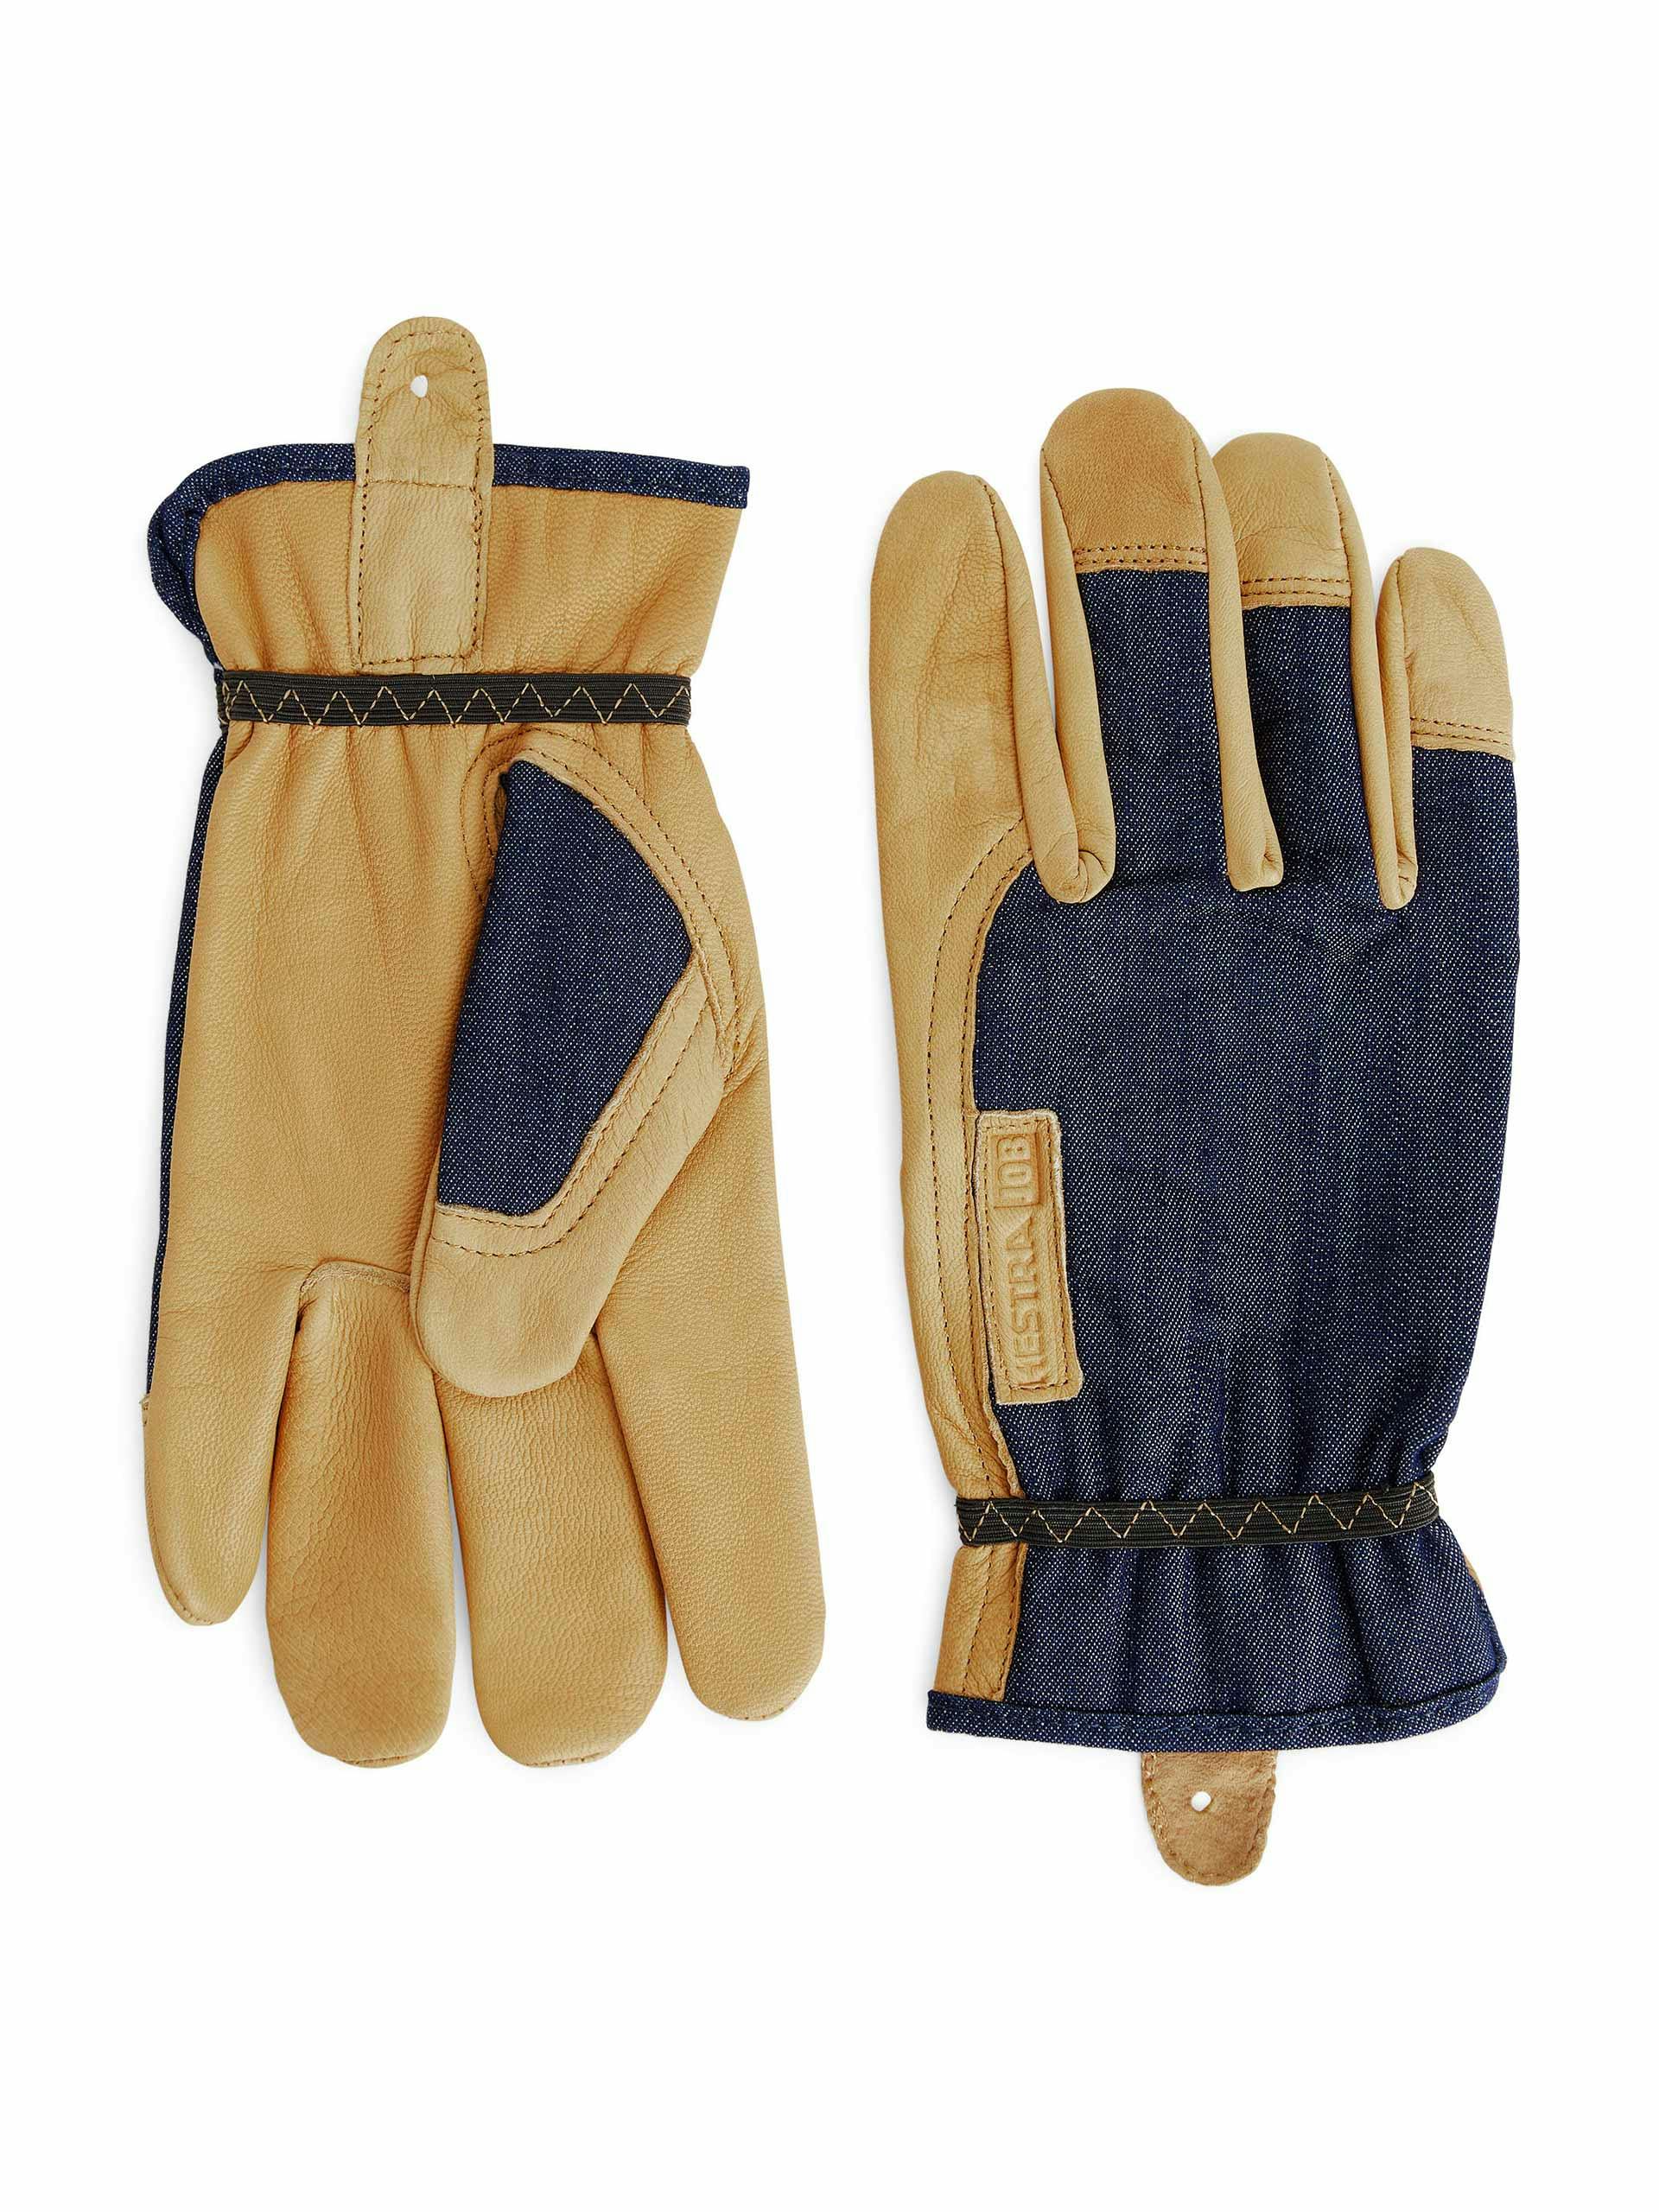 Gardening gloves in goat leather and denim